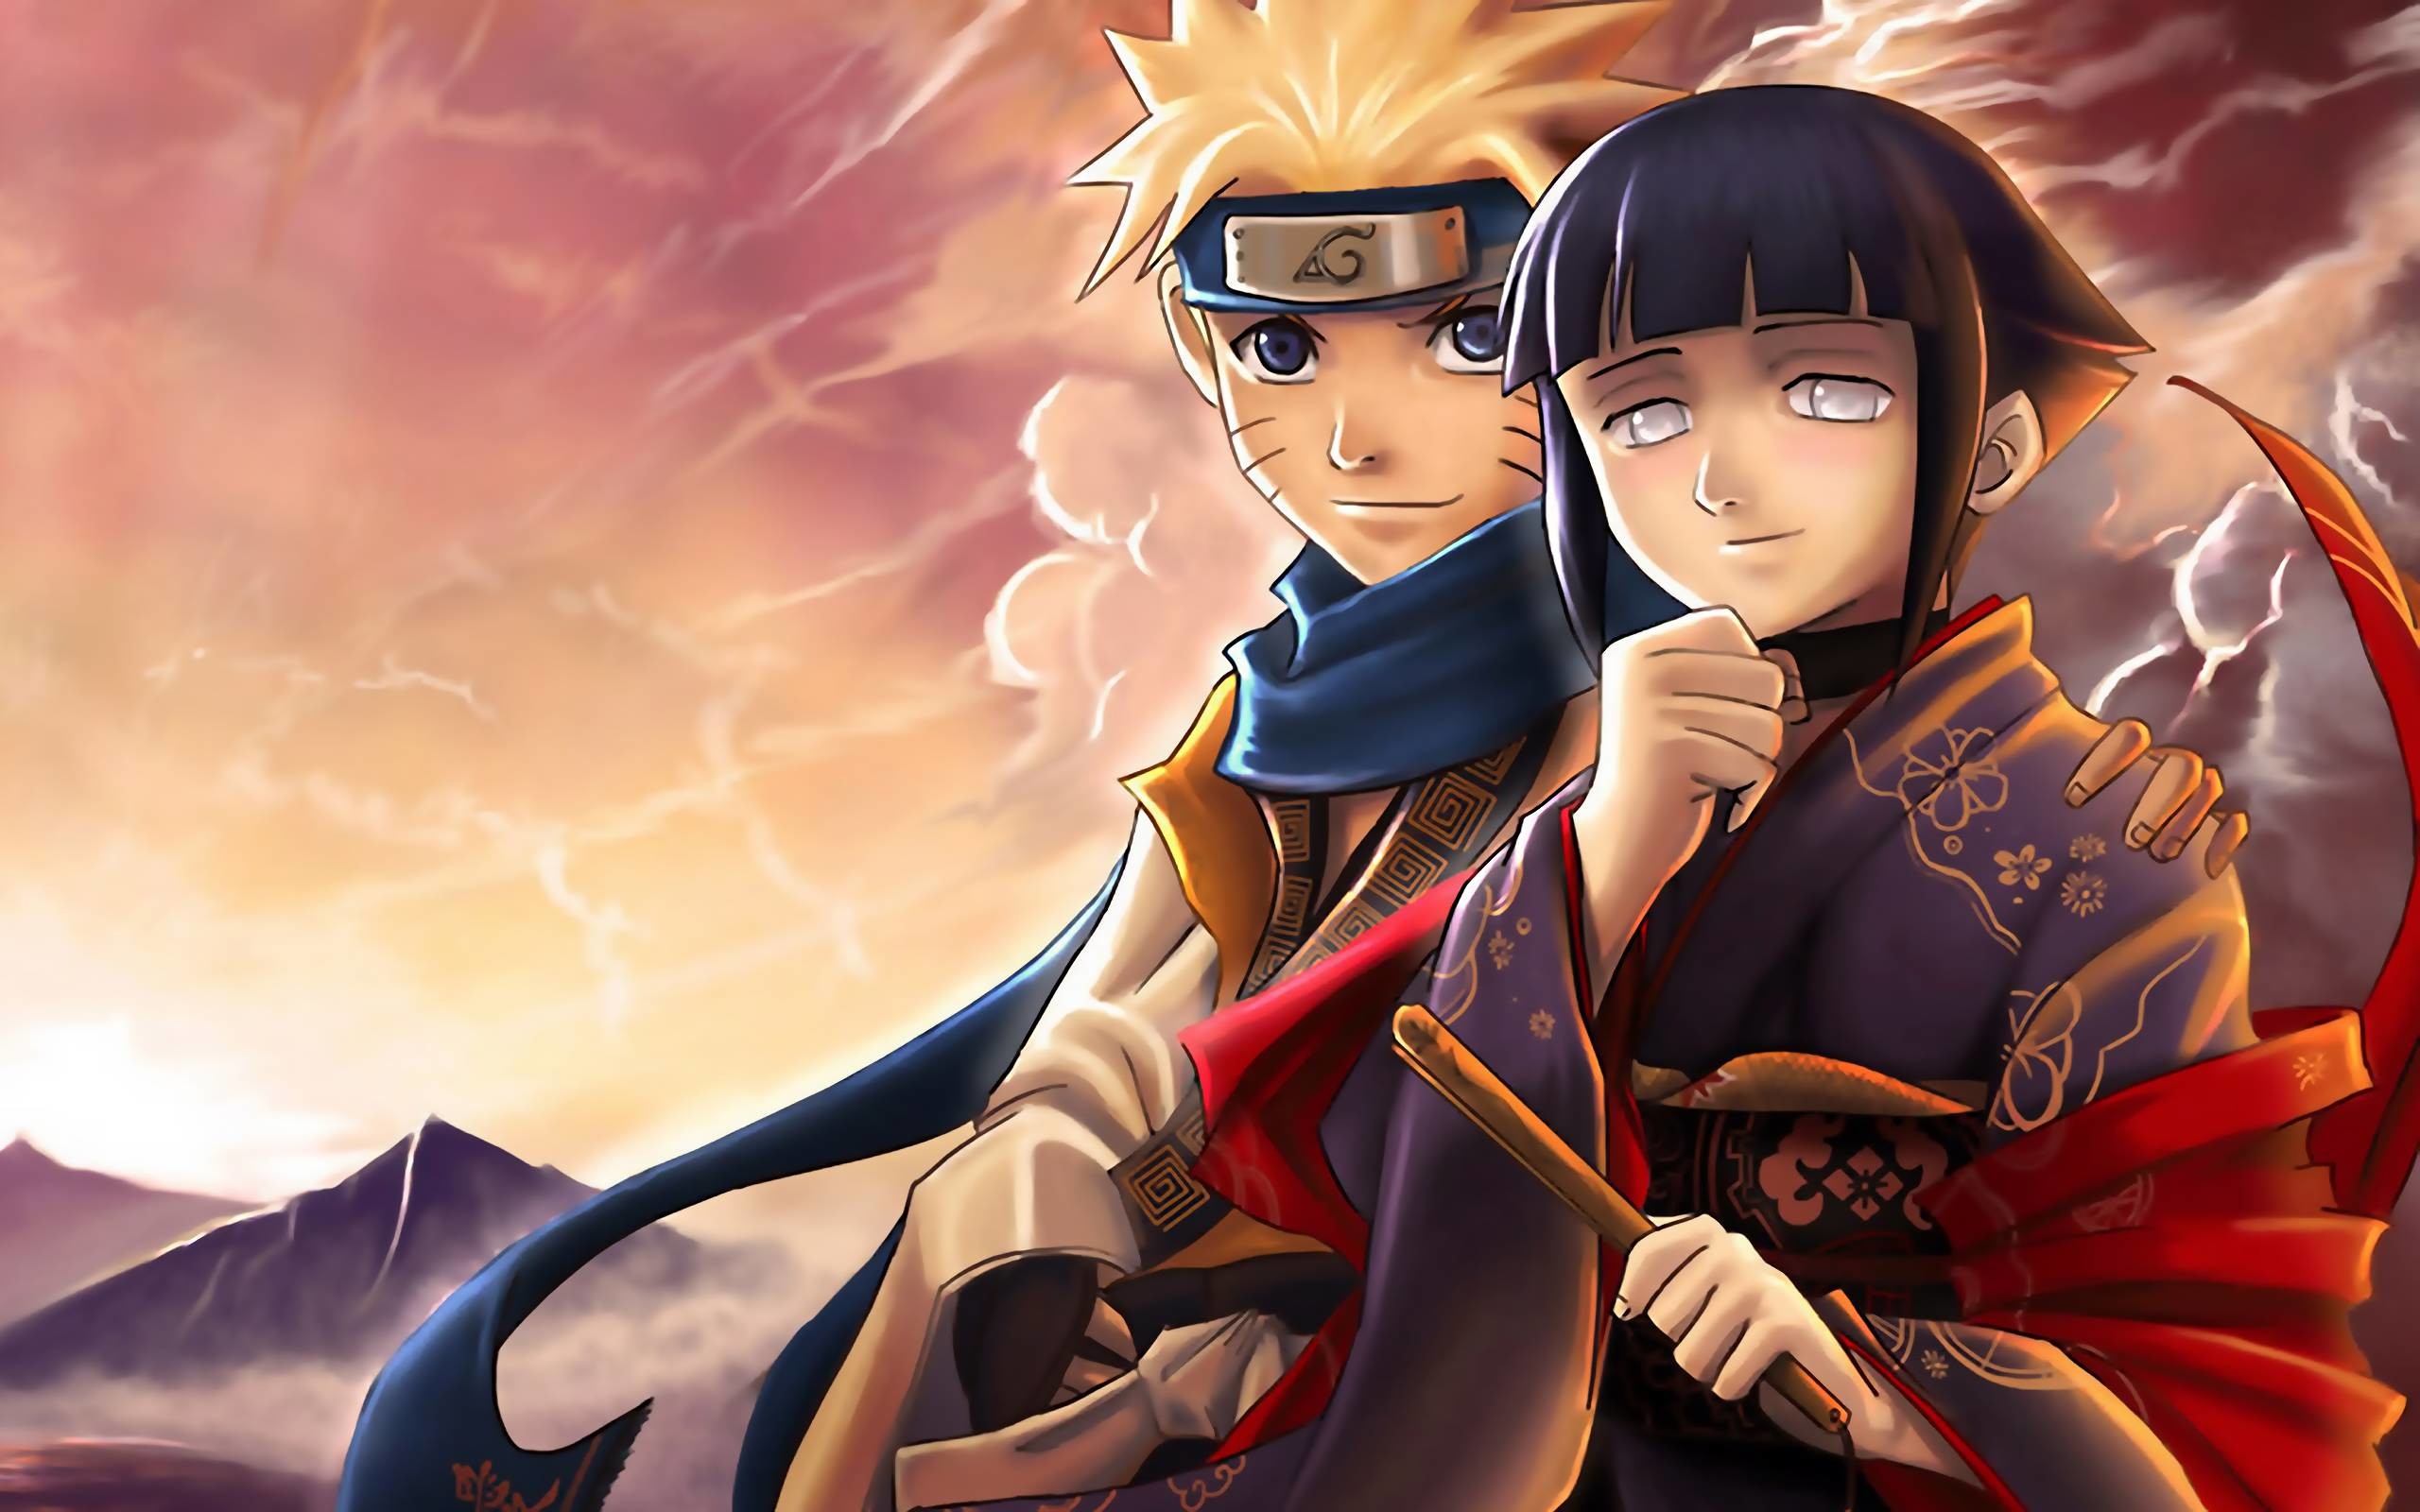 2560x1600 Wallpaper Hd Naruto Collection For Free Download 2560Ã1600